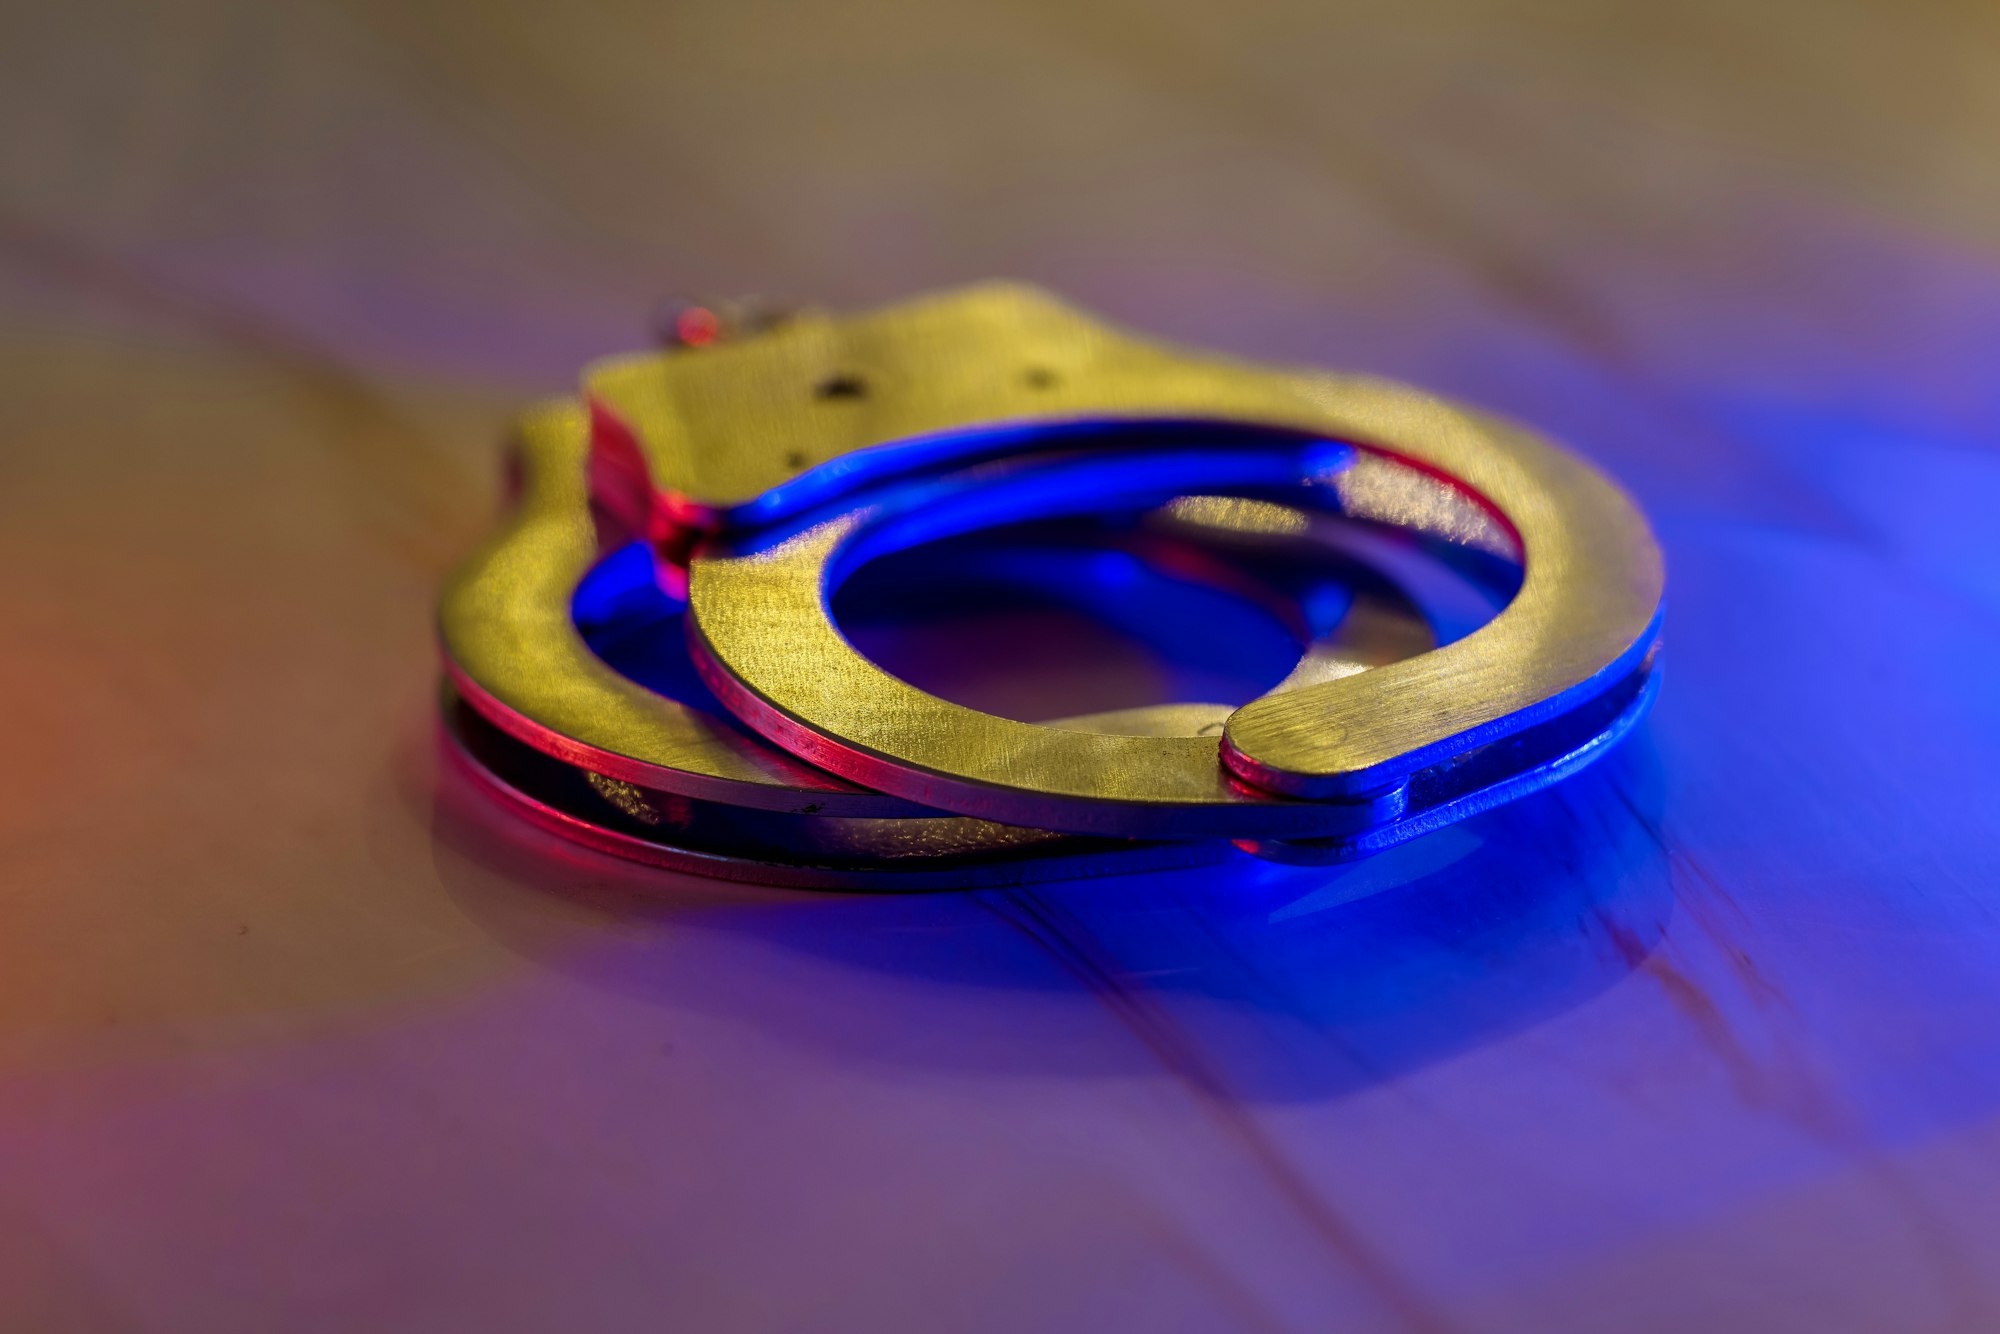 Flashing red and blue police lights of handcuffs police